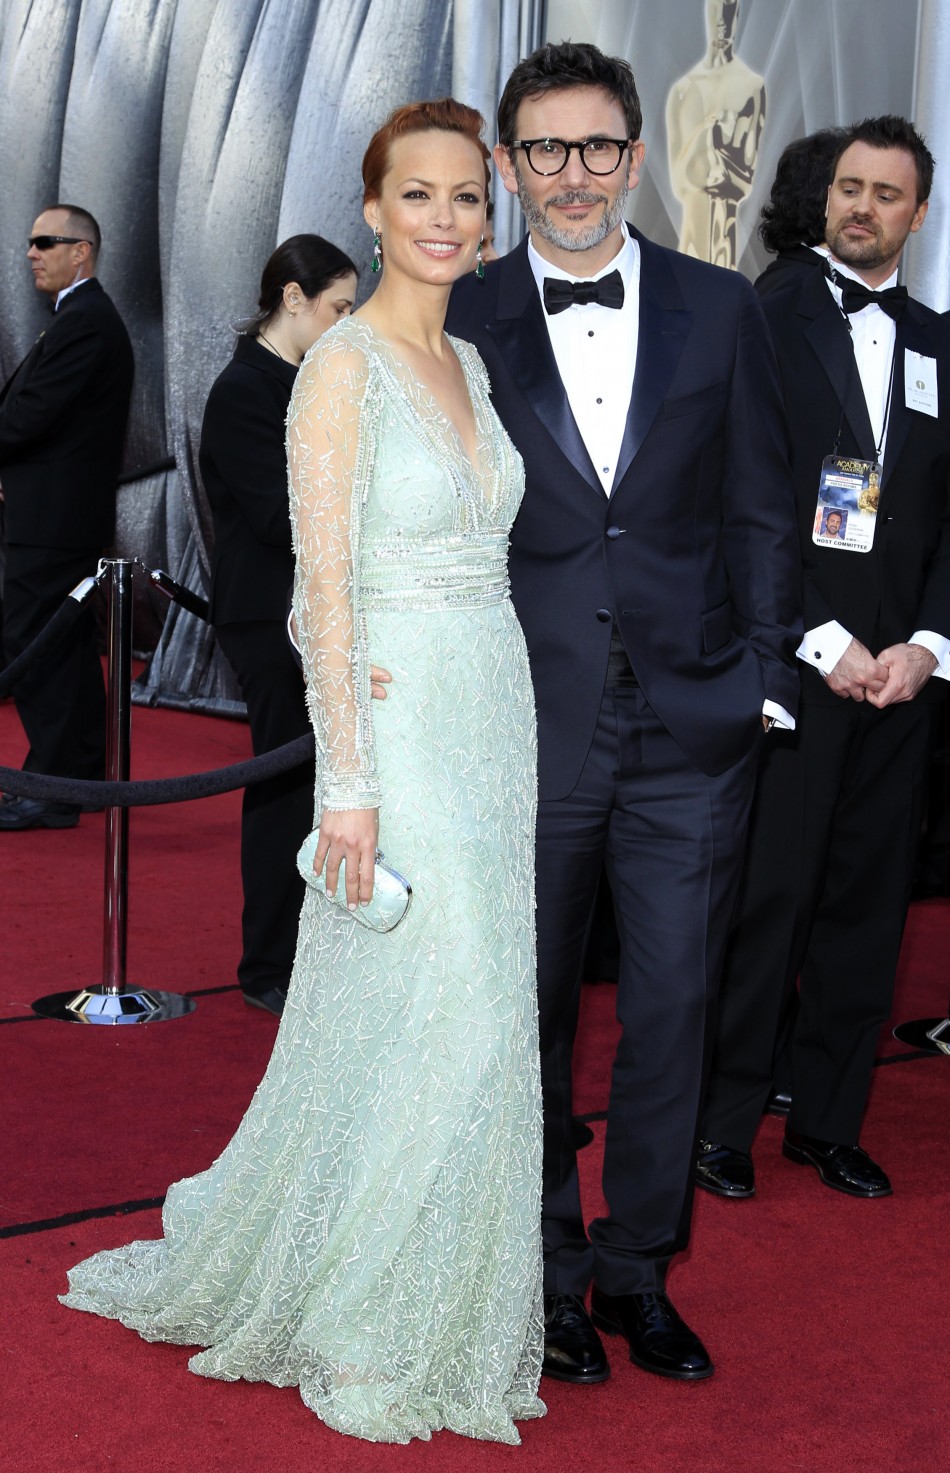 Berenice Bejo, best supporting actress nominee, and her husband French director Michel Hazanavicius, best director nominee, arrive at the 84th Academy Awards in Hollywood